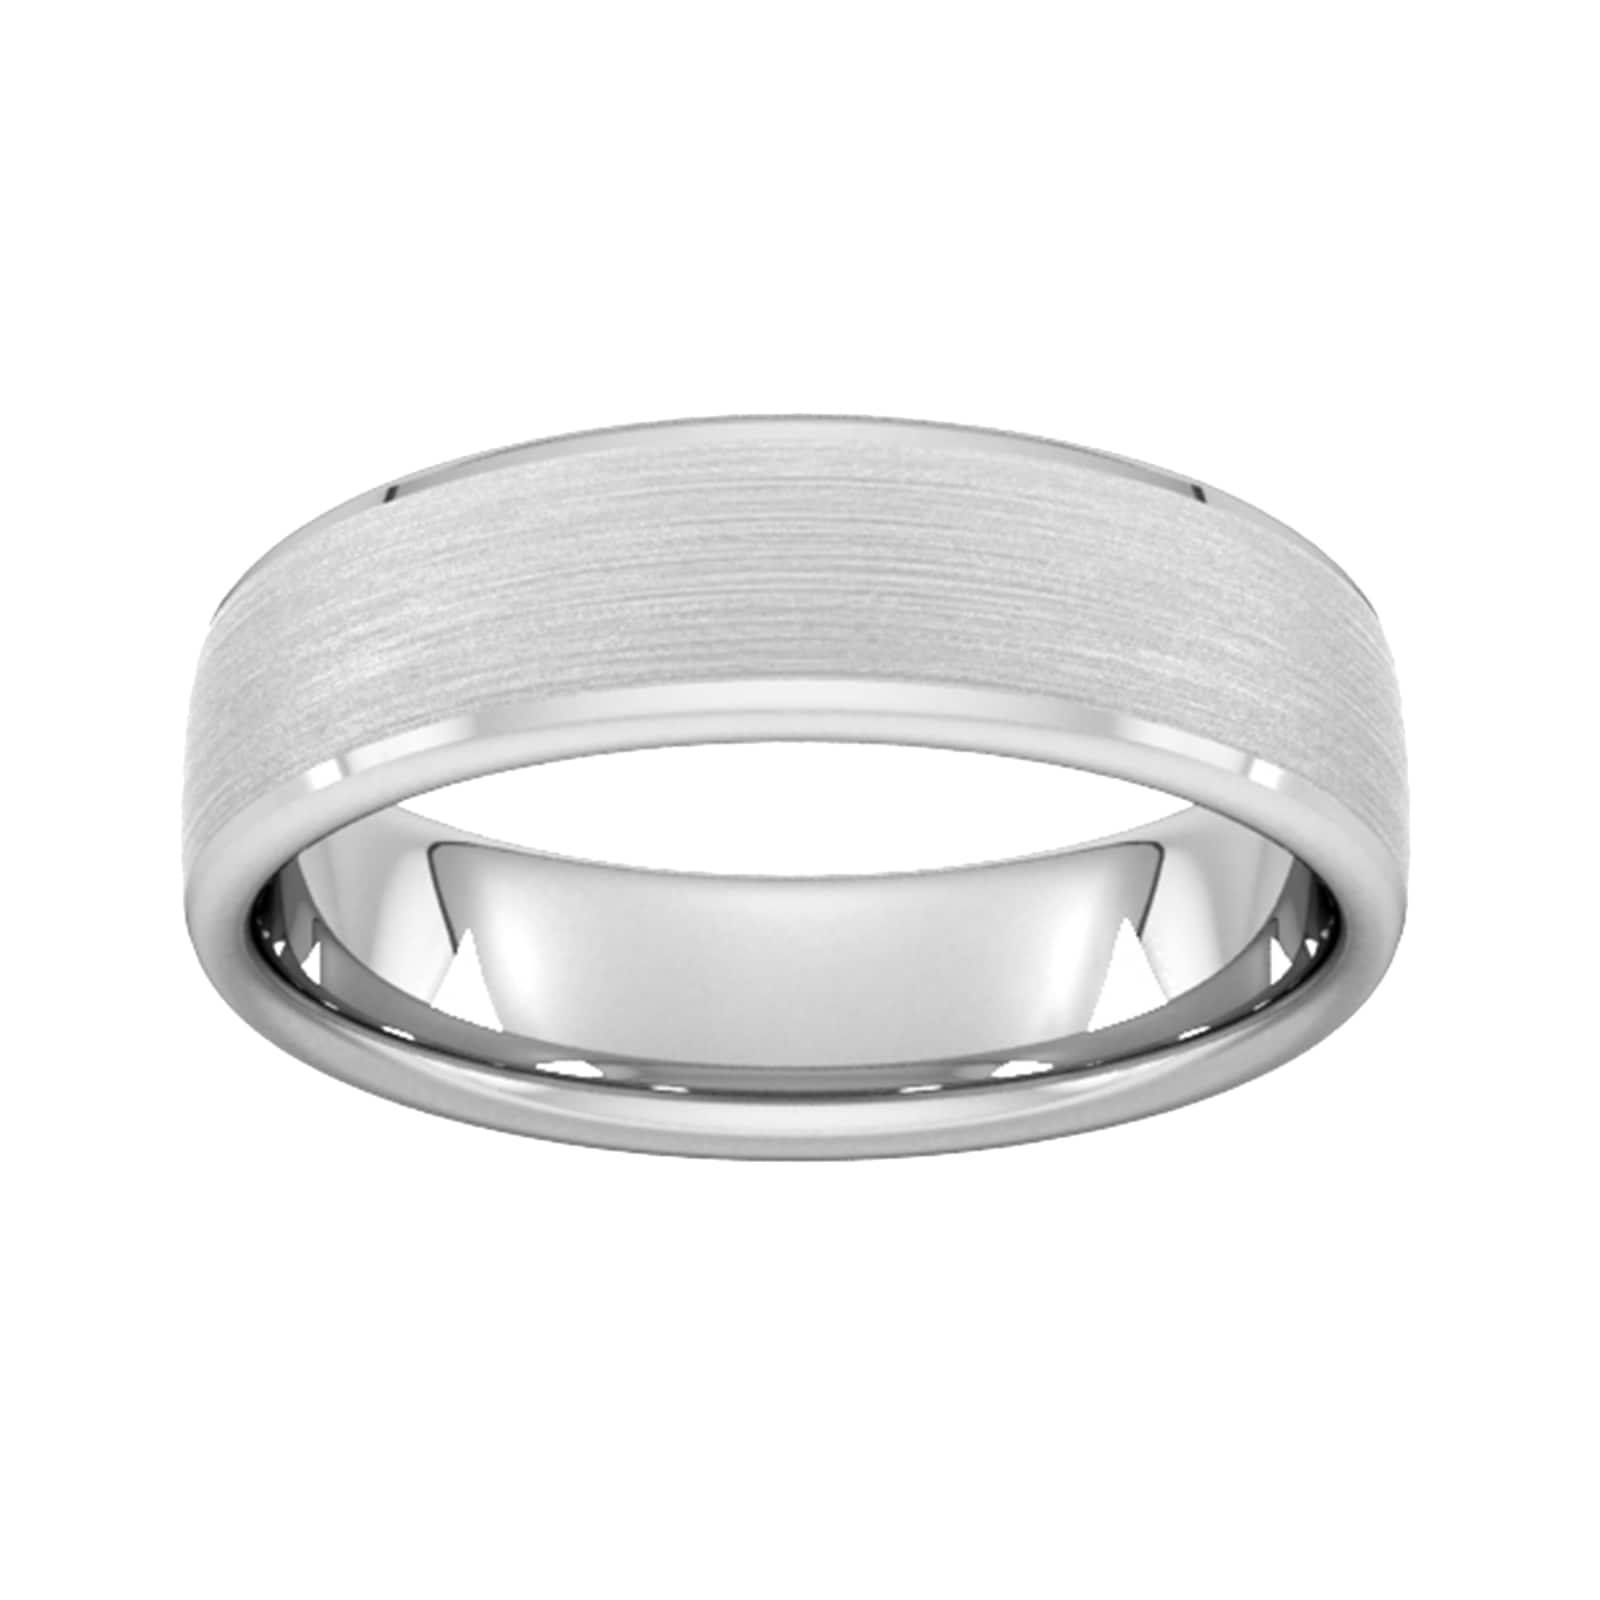 6mm Traditional Court Standard Polished Chamfered Edges With Matt Centre Wedding Ring In 18 Carat White Gold - Ring Size K